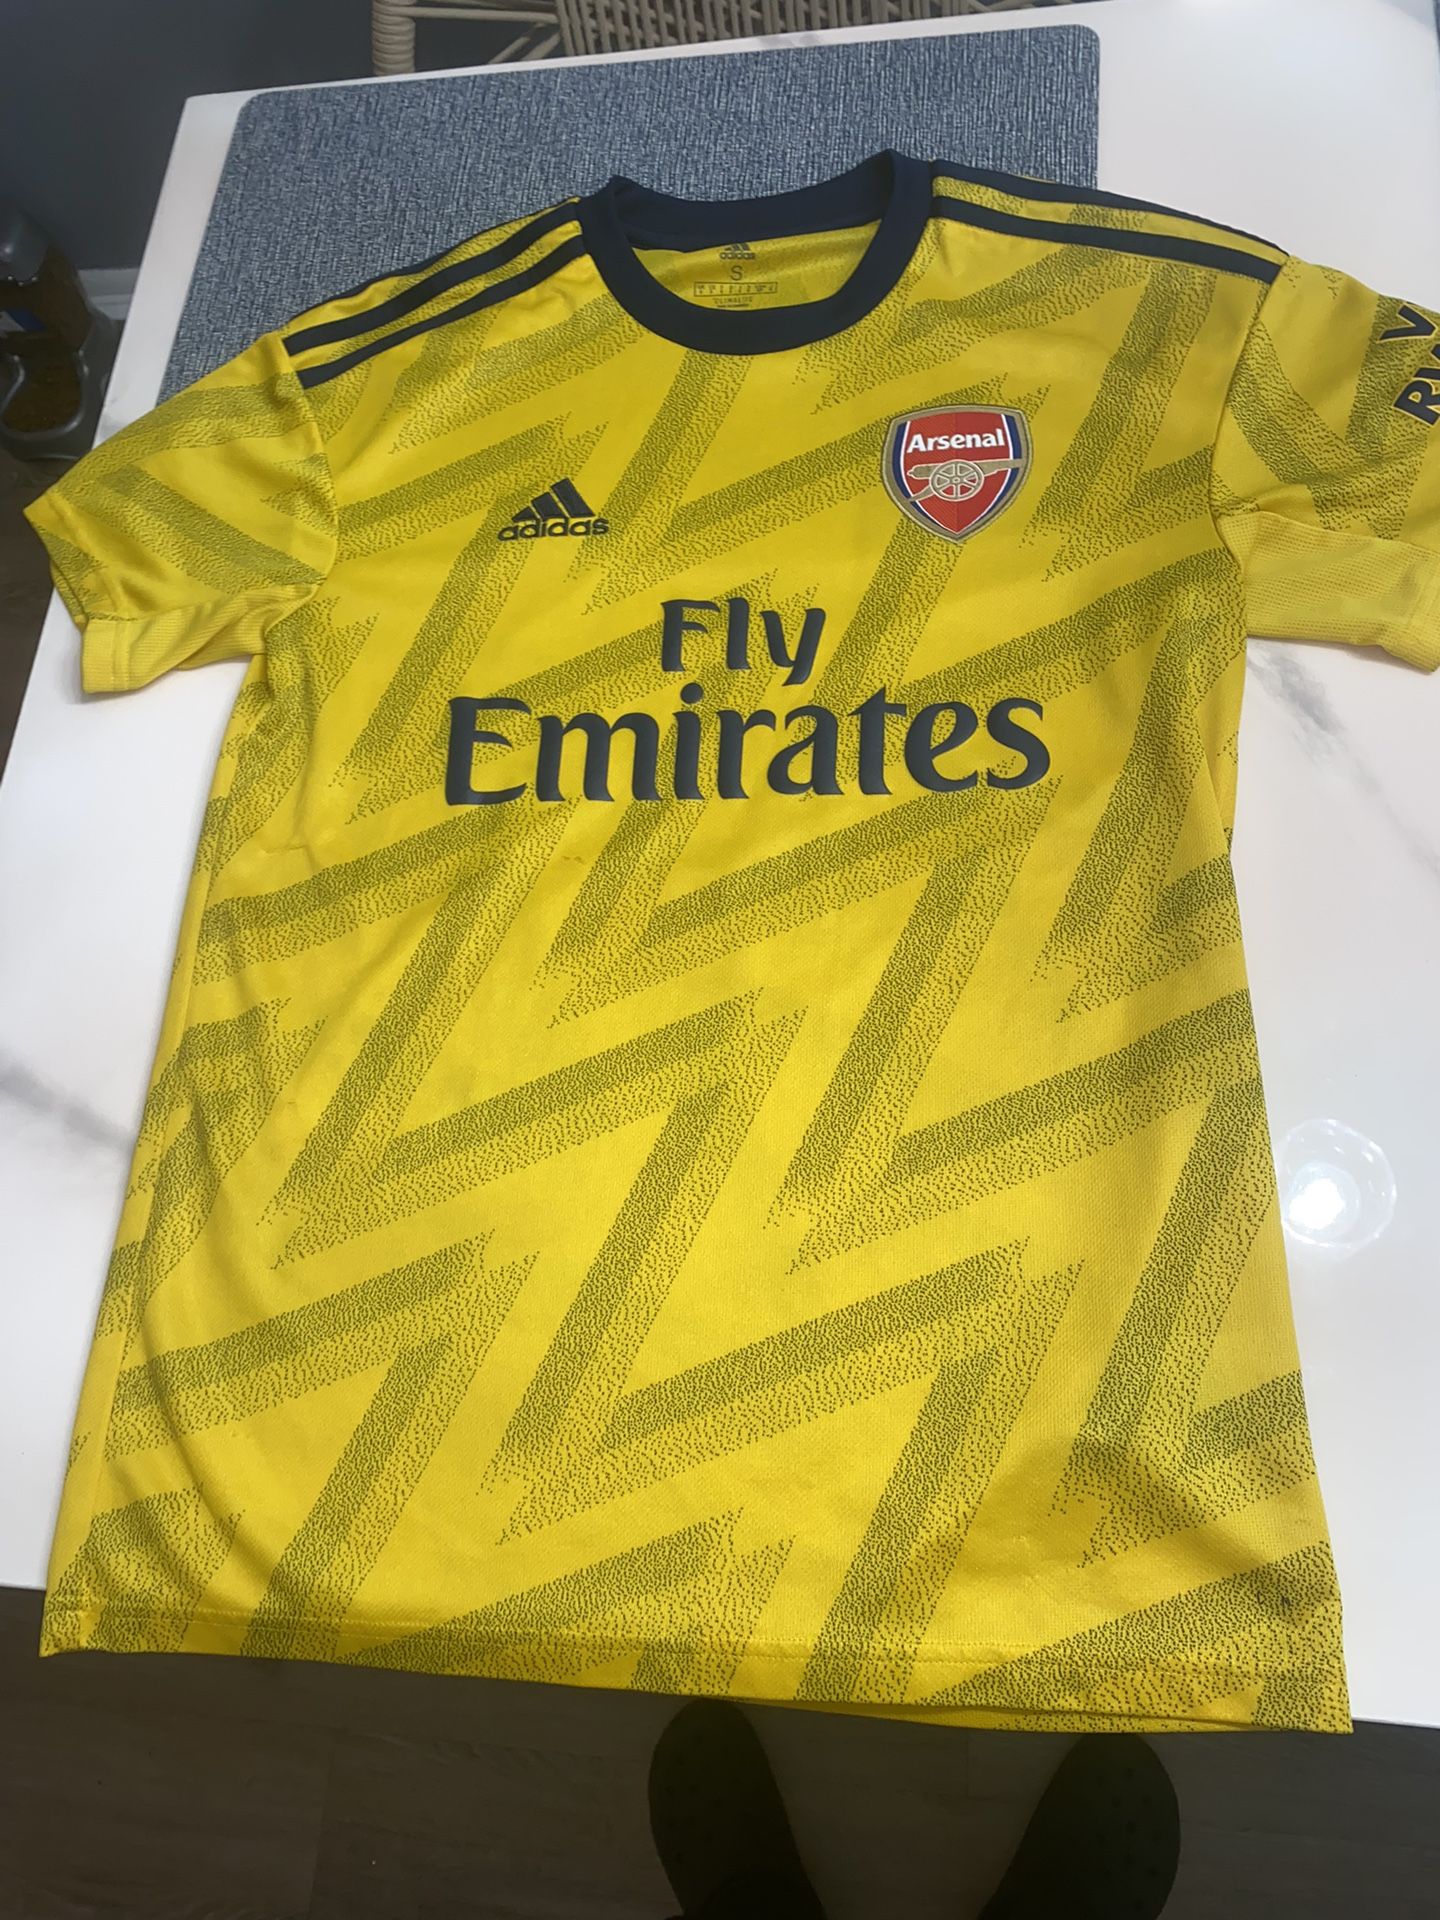 Adidas Fly Emirates Fútball Jersey 